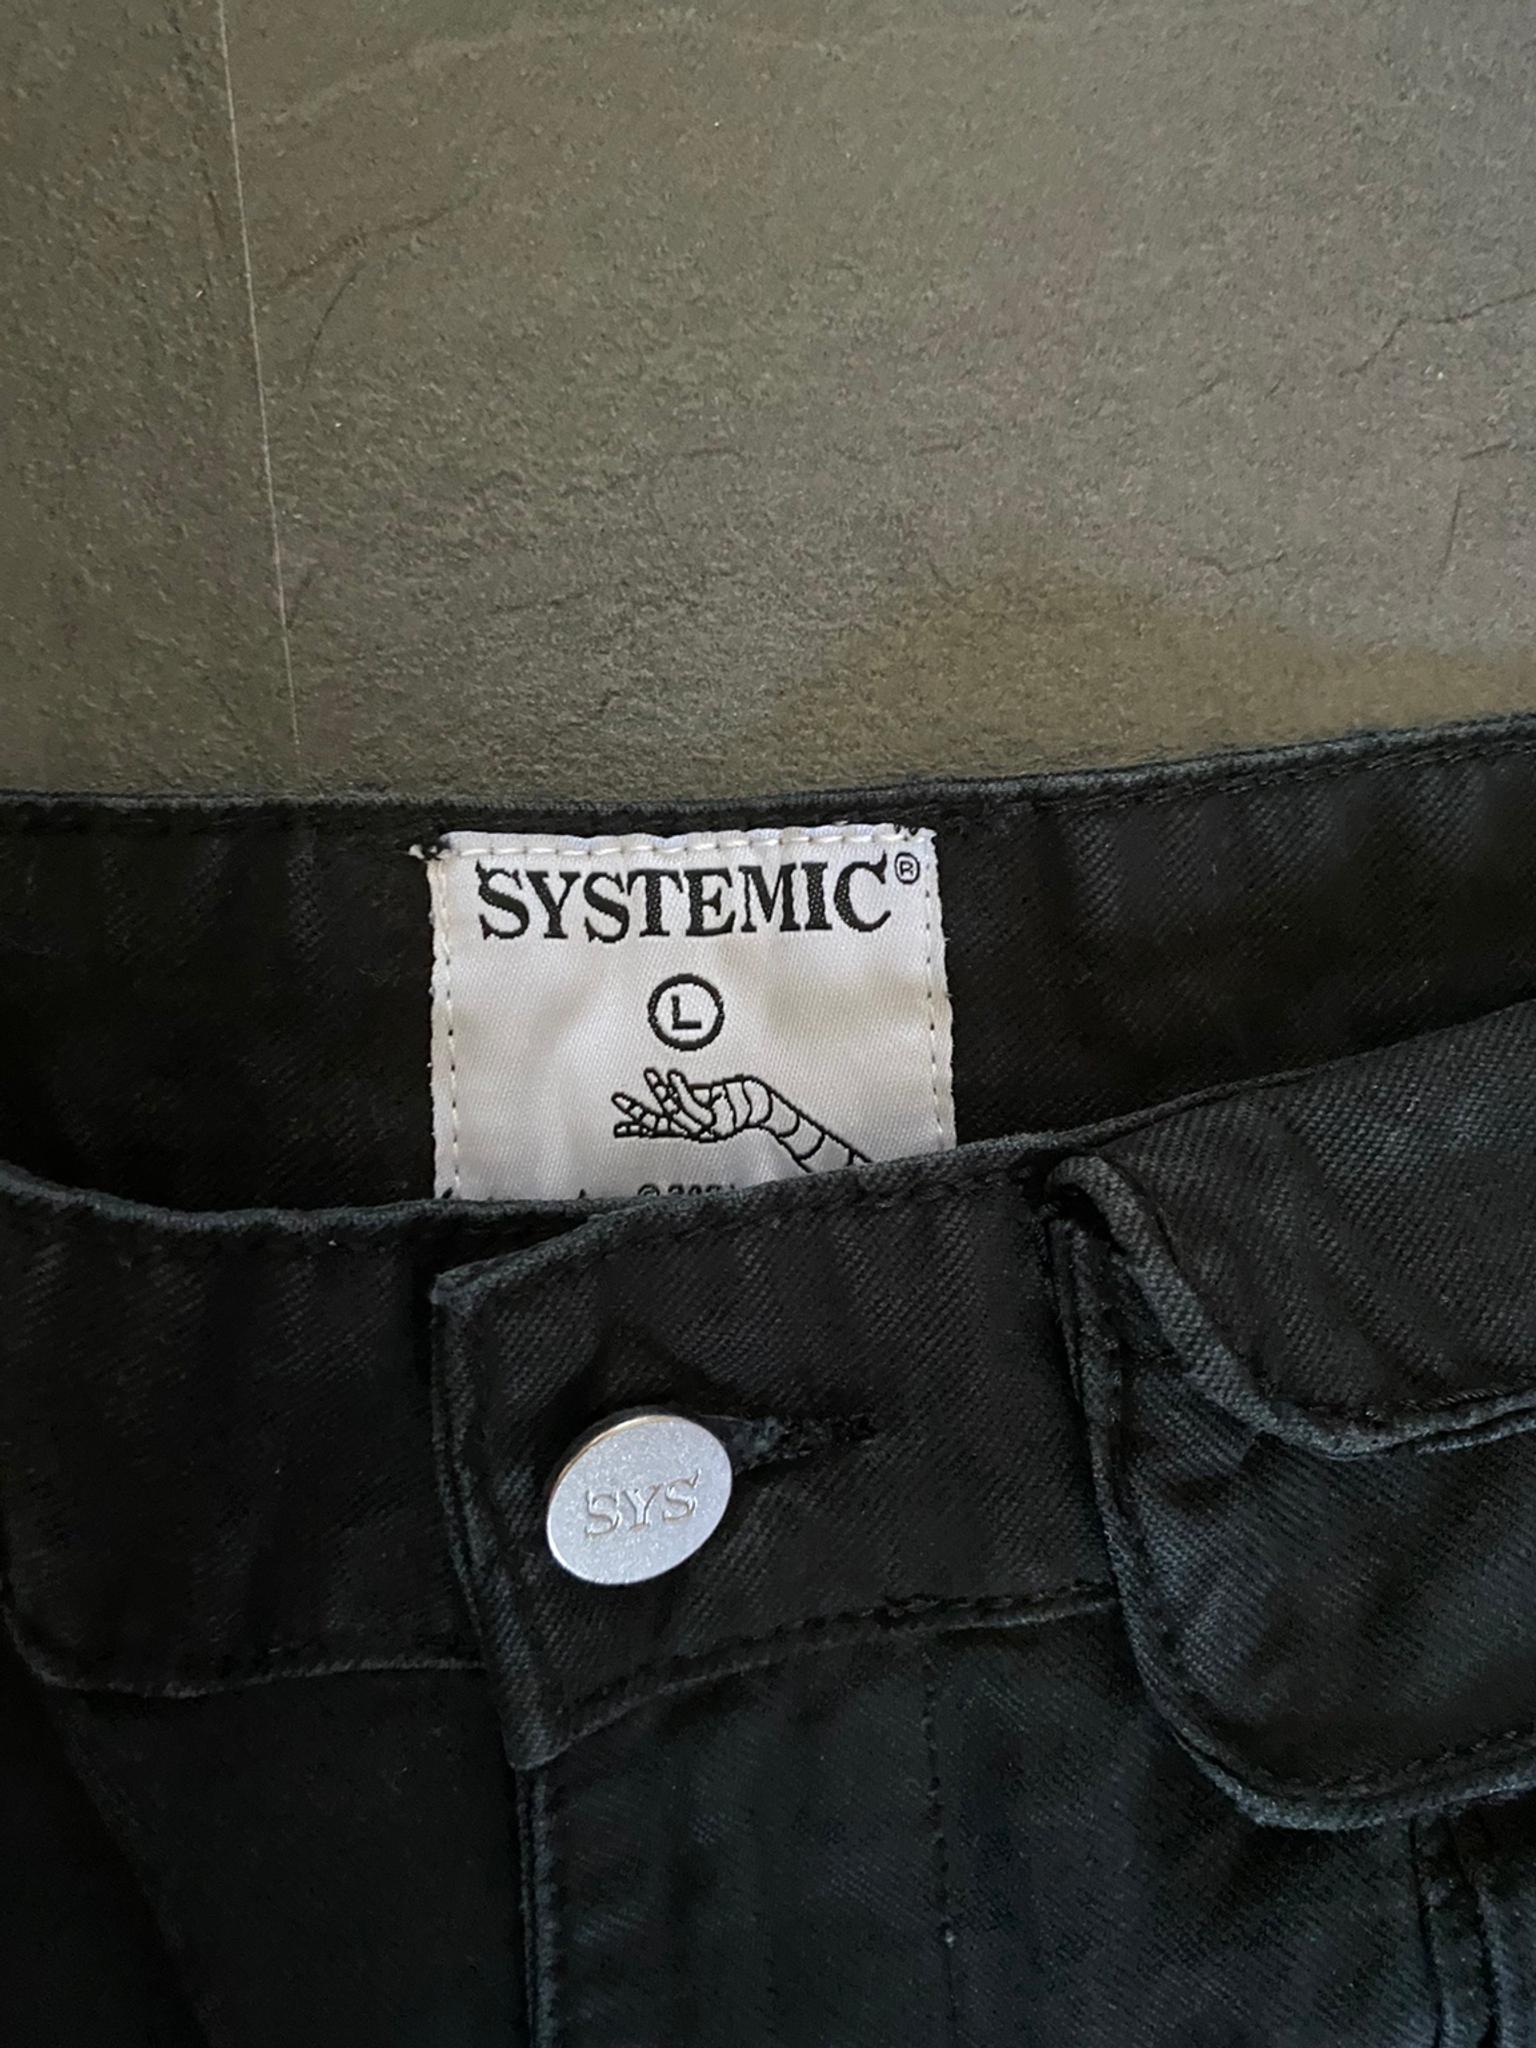 Systemic Cargo L in 2301 Gemeinde Groß-Enzersdorf for €240.00 for sale ...